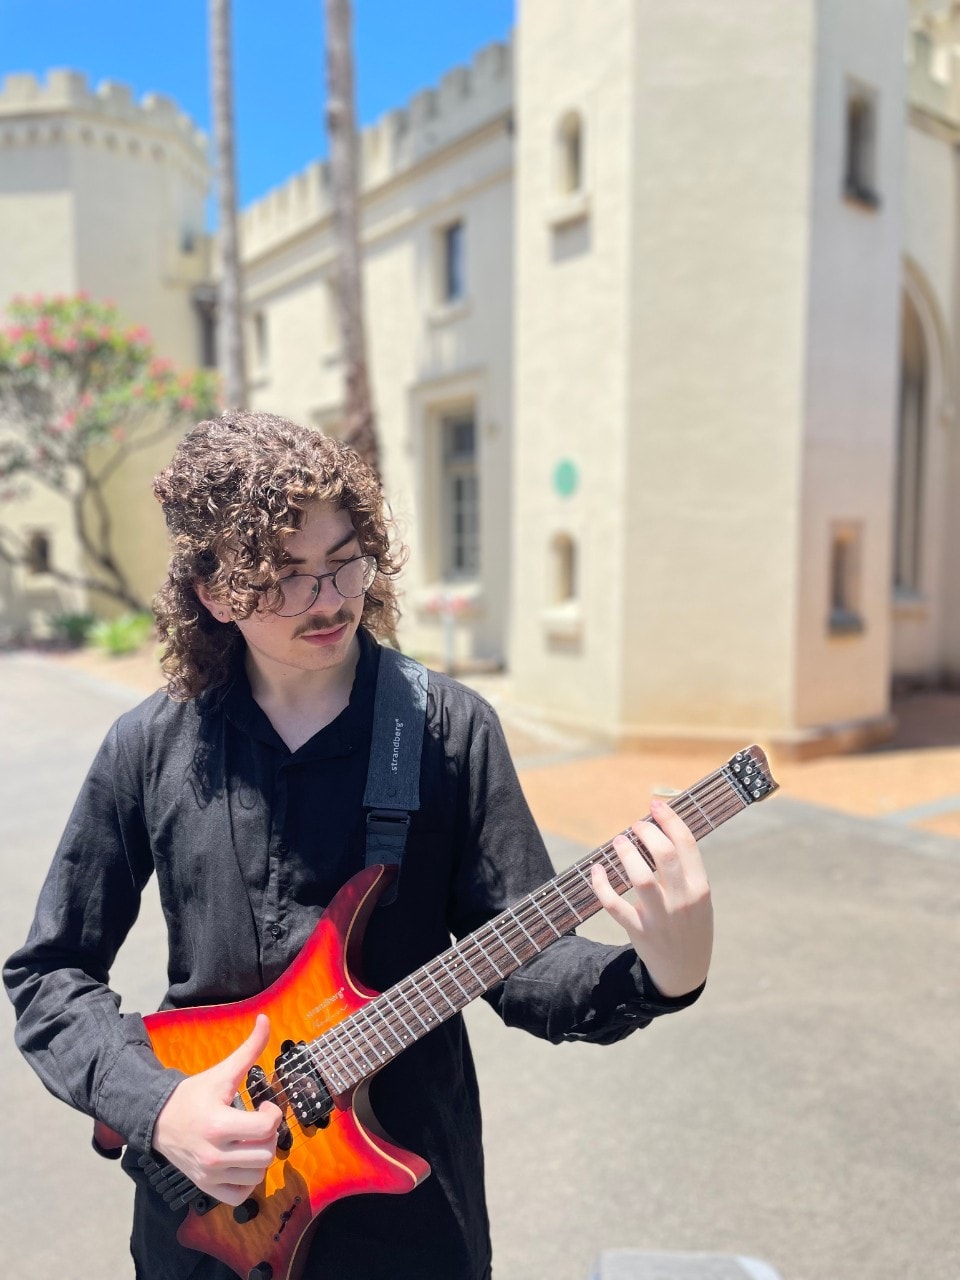 Alex Andrevski holding an electric guitar in front of the Conservatorium of Music building